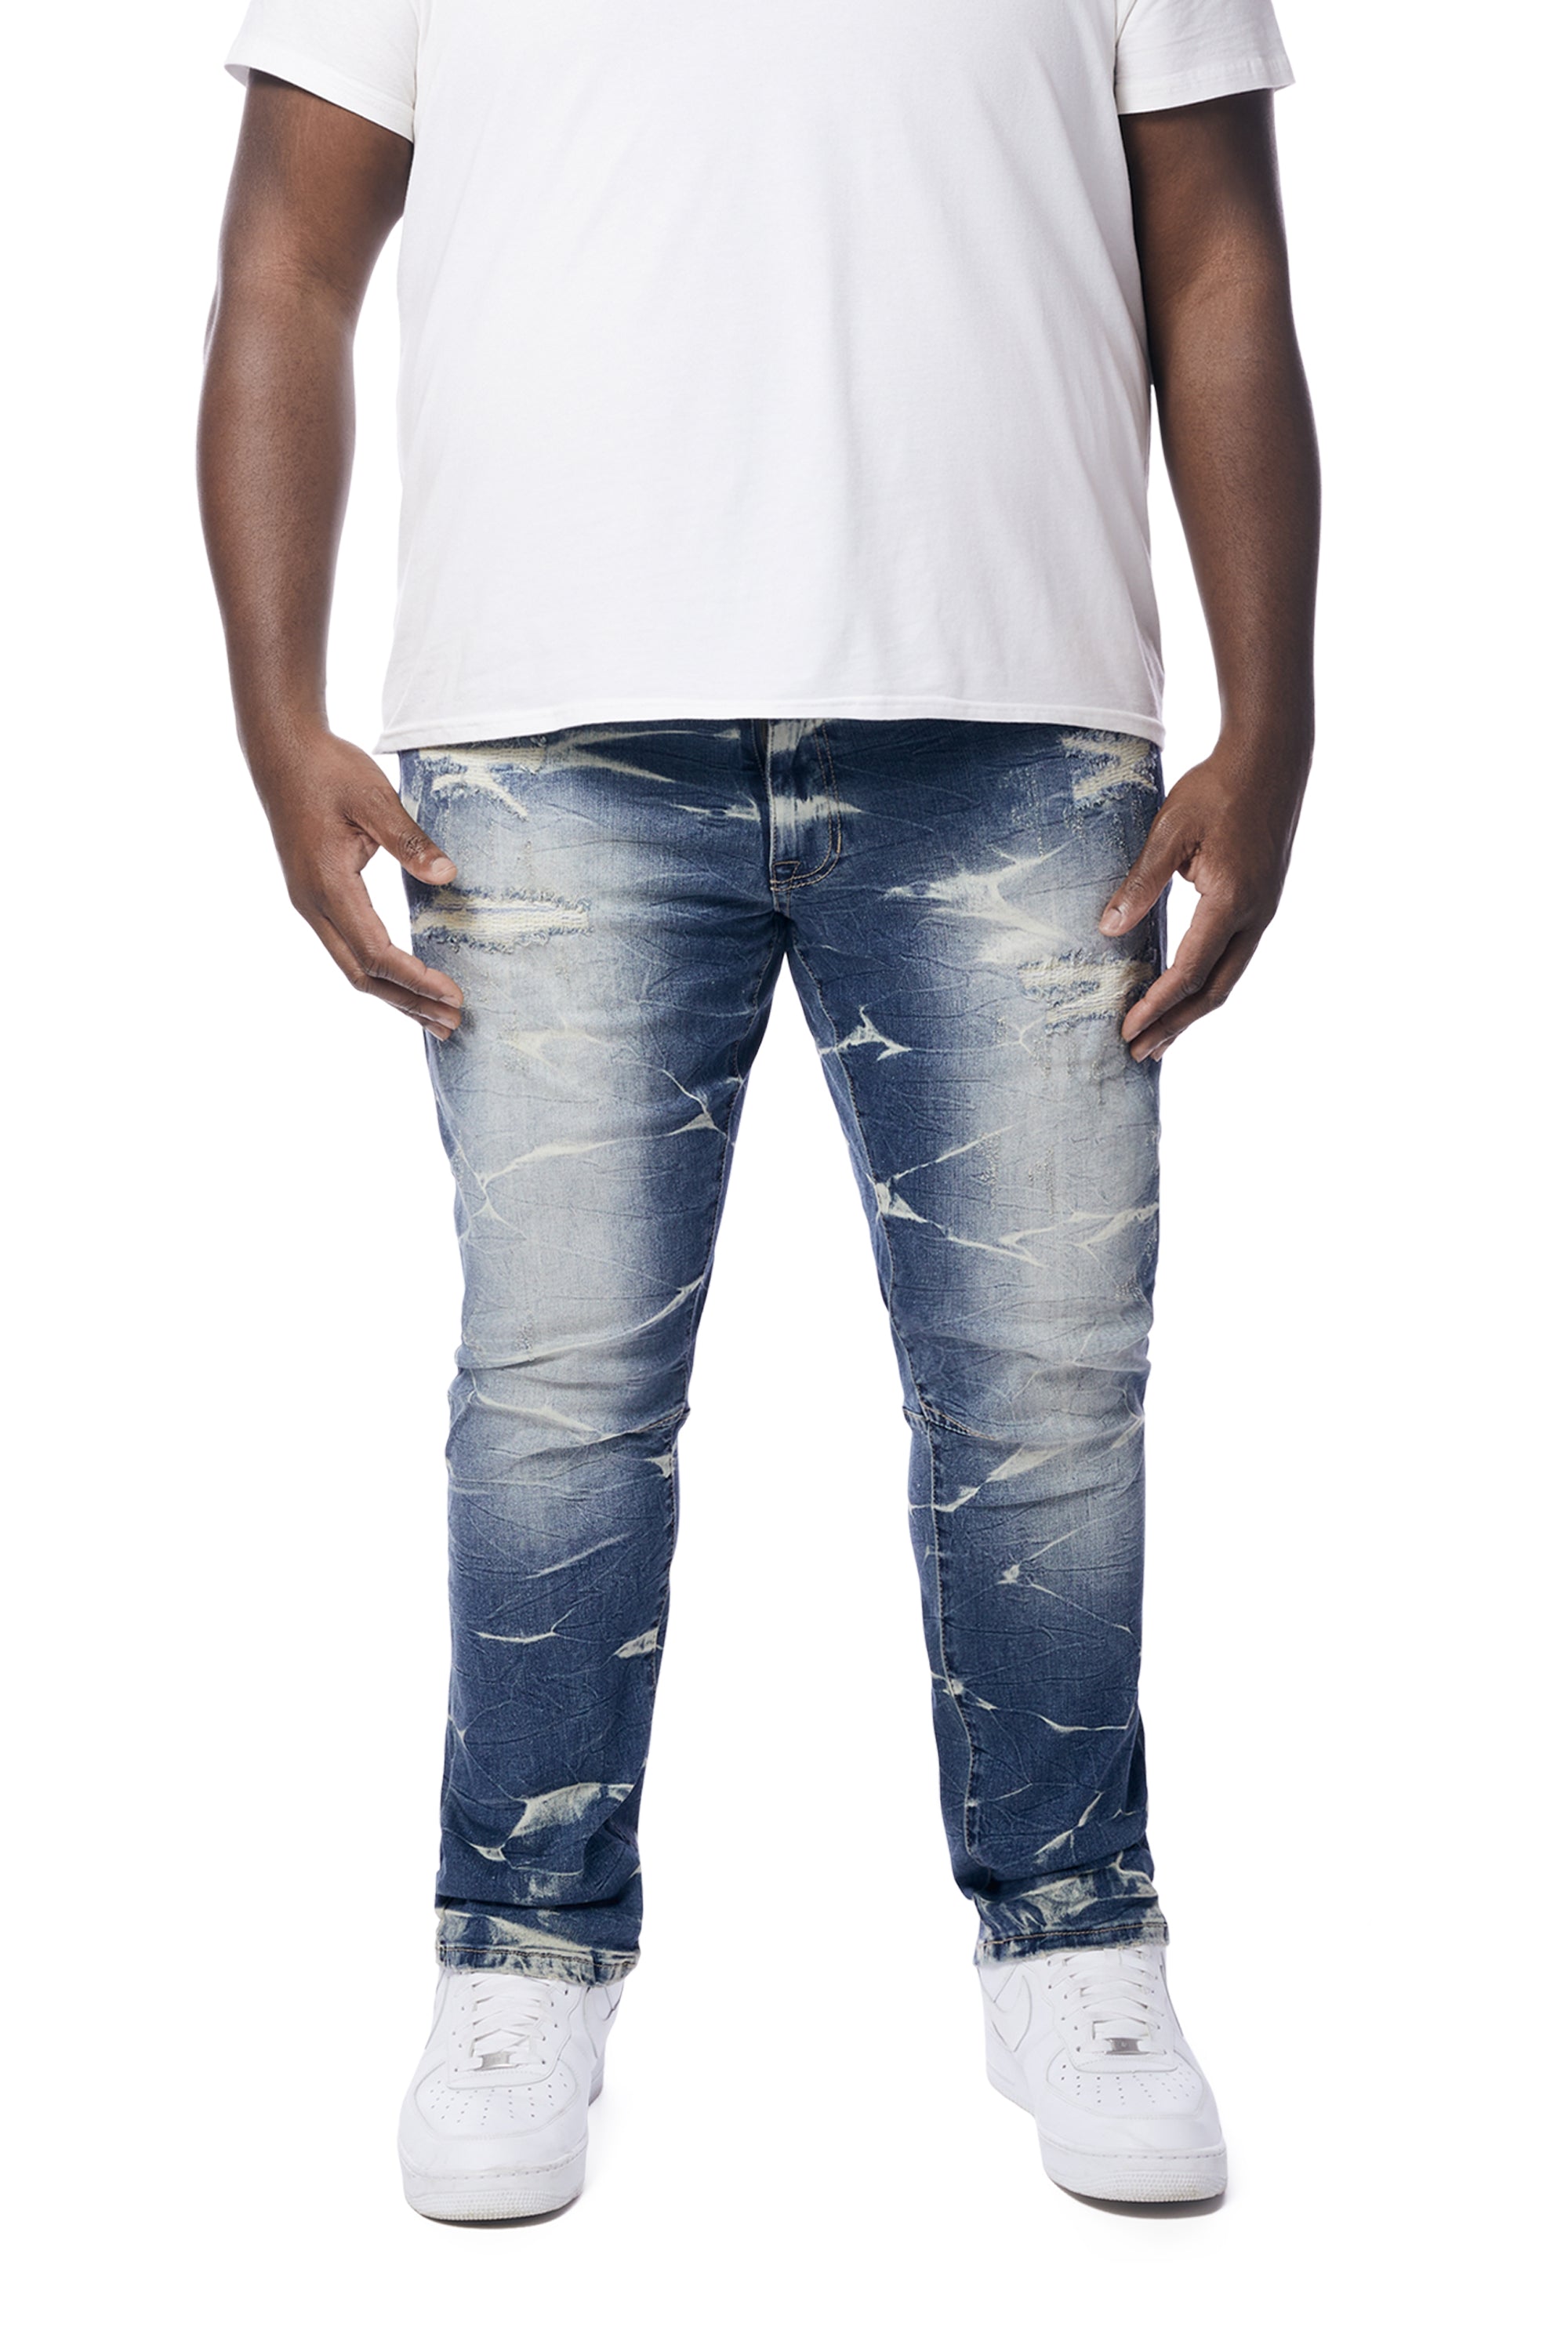 Big and Tall - Rip & Repaired Lightning Washed Denim Jeans - Westport Blue